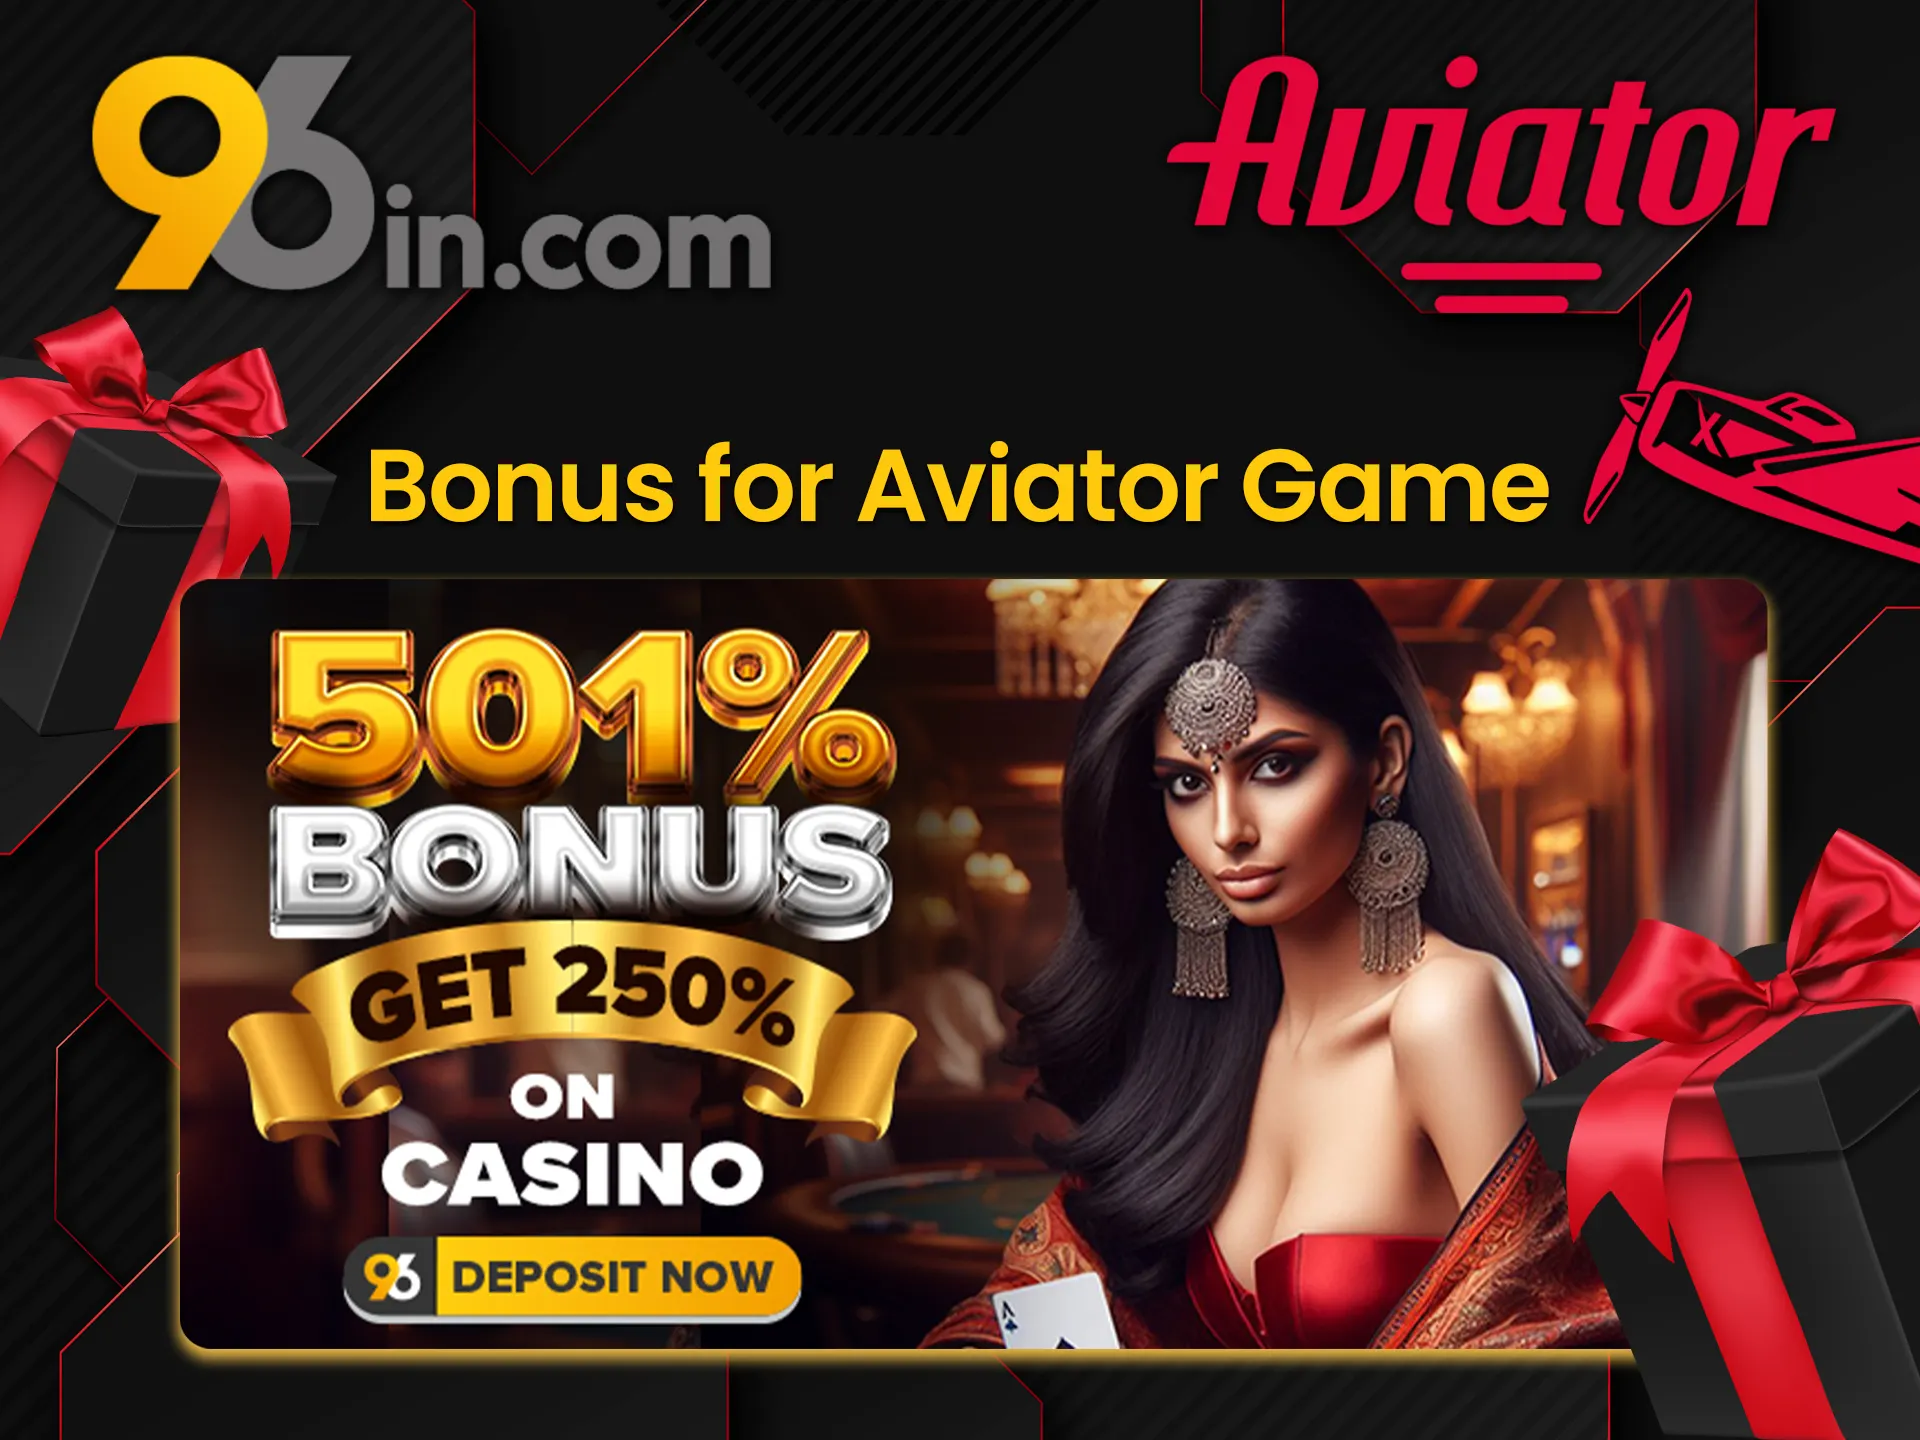 96in offers every player a bonus offer on their first deposit in the Aviator game.